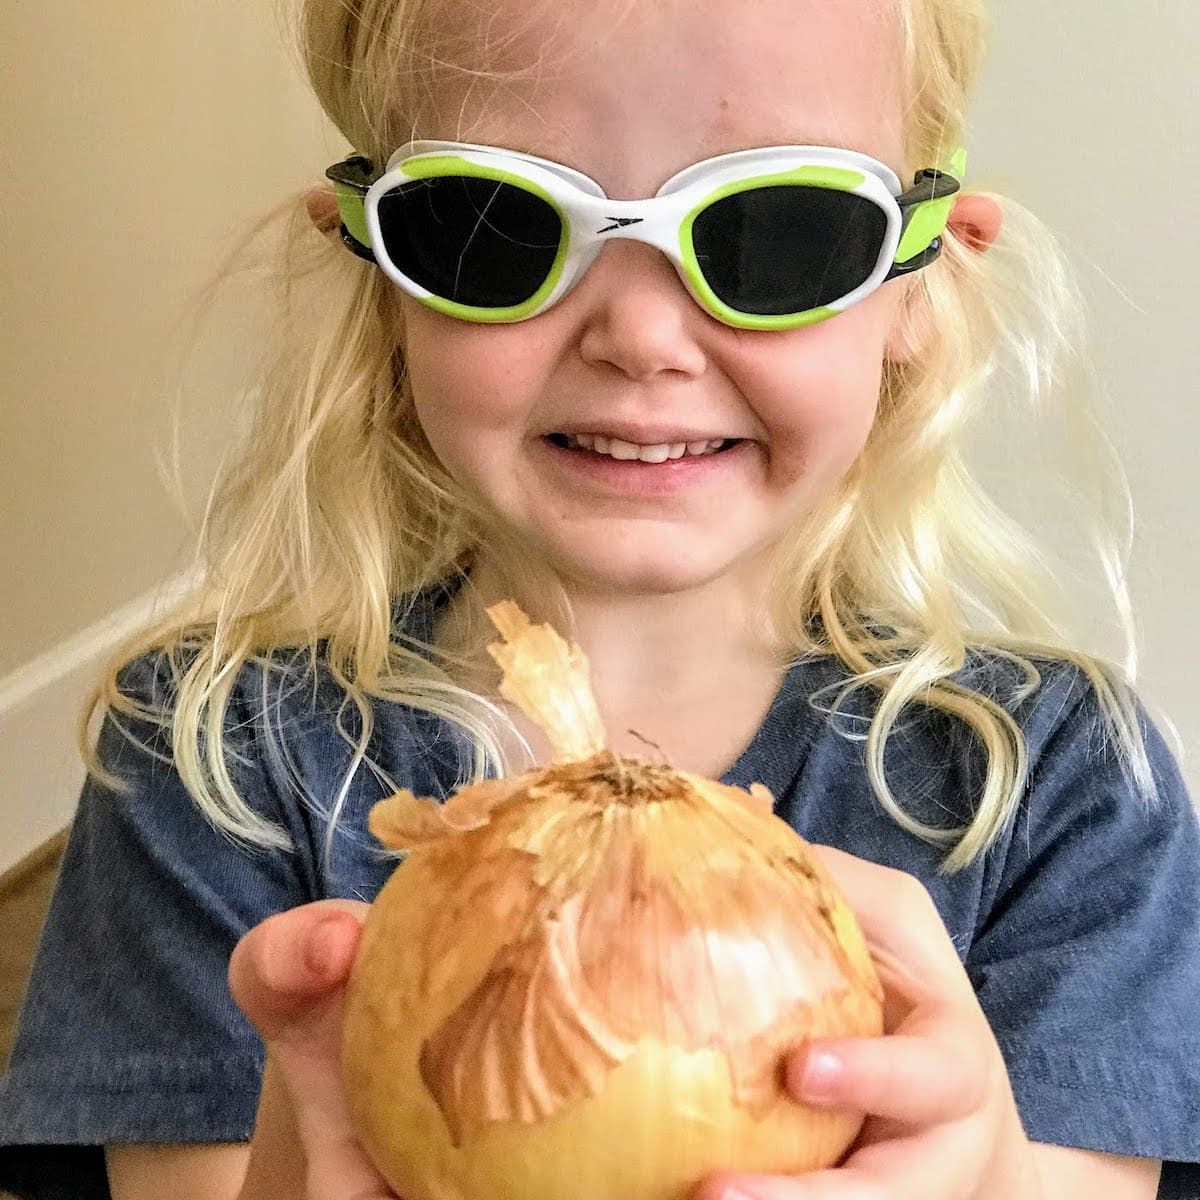 blonde child holding onion and wearing swim goggles